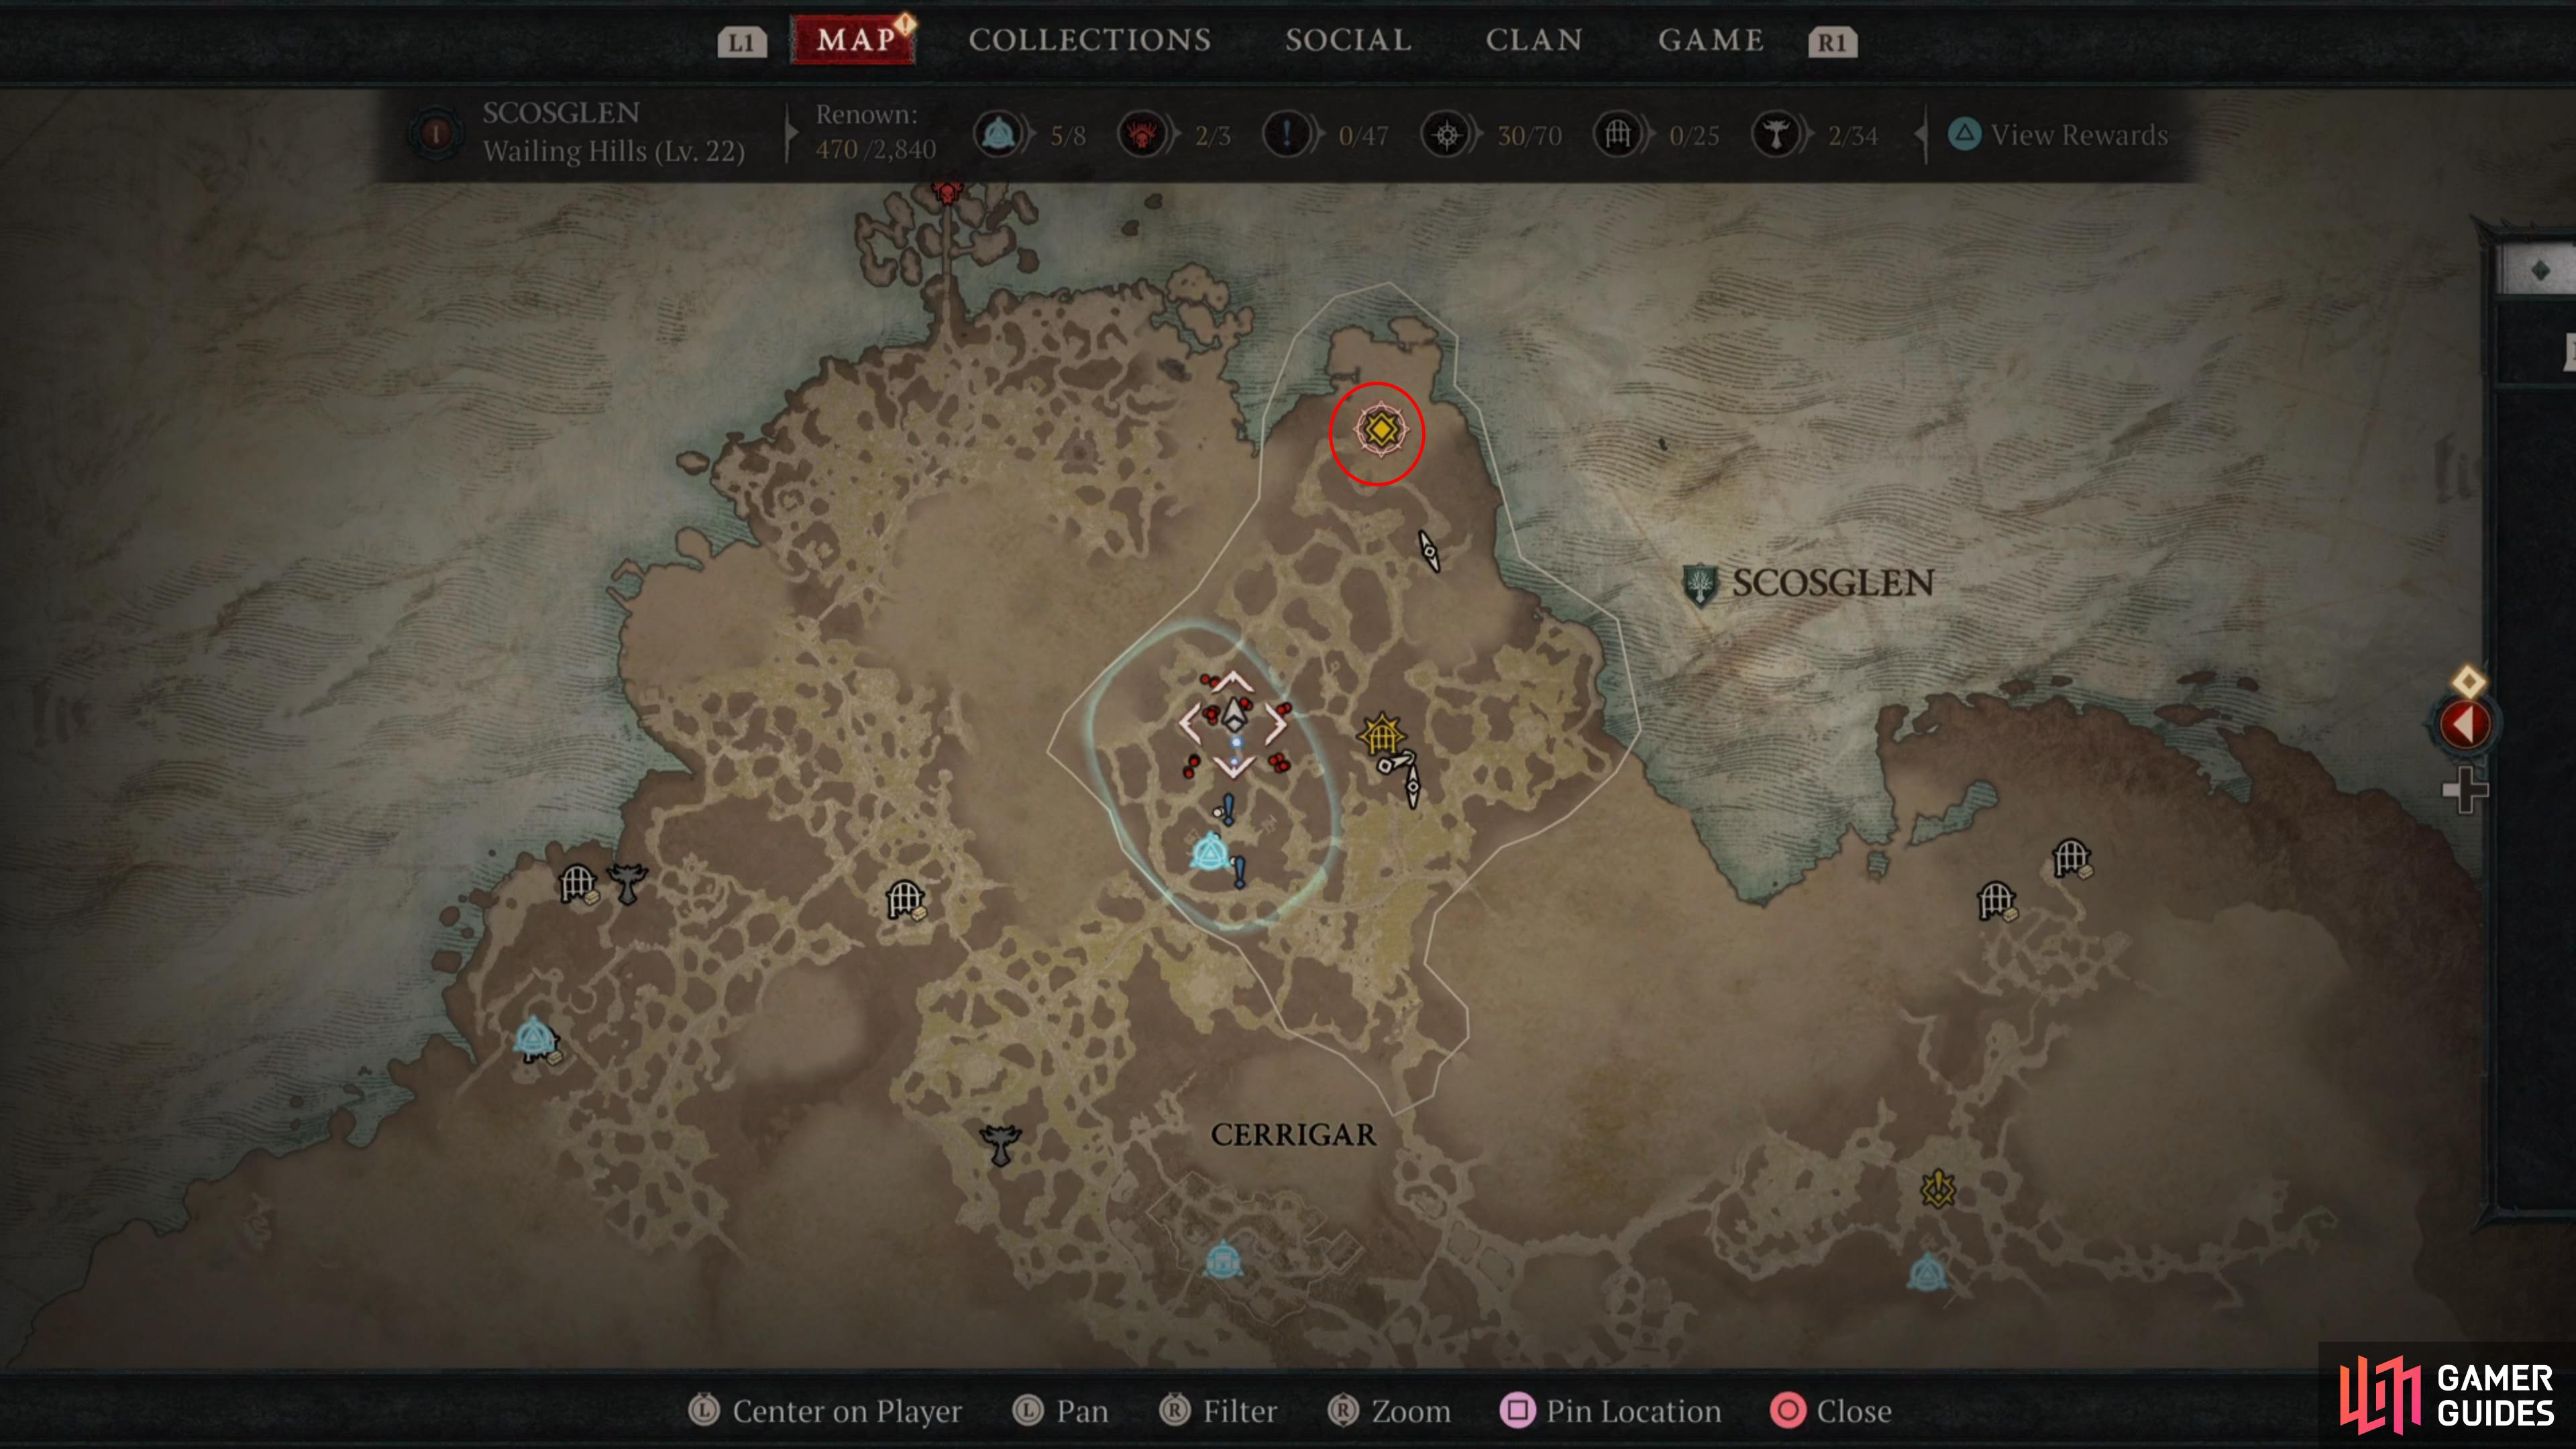 Head to this location on the map to initiate the boss fight.